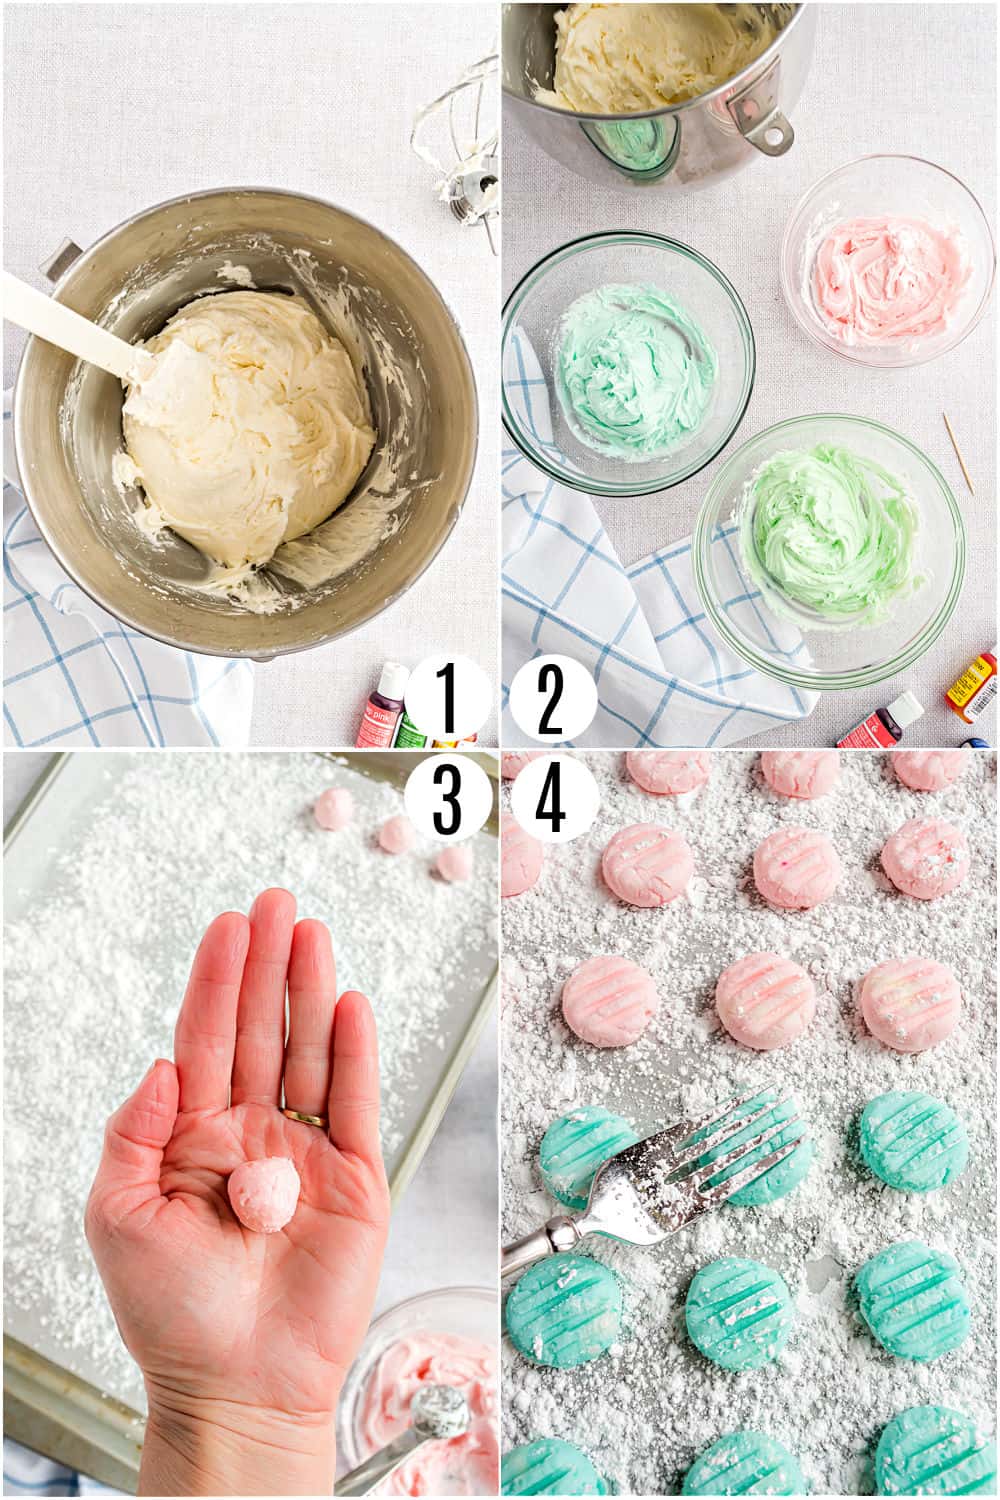 Step by step photos showing how to make cream cheese mints.